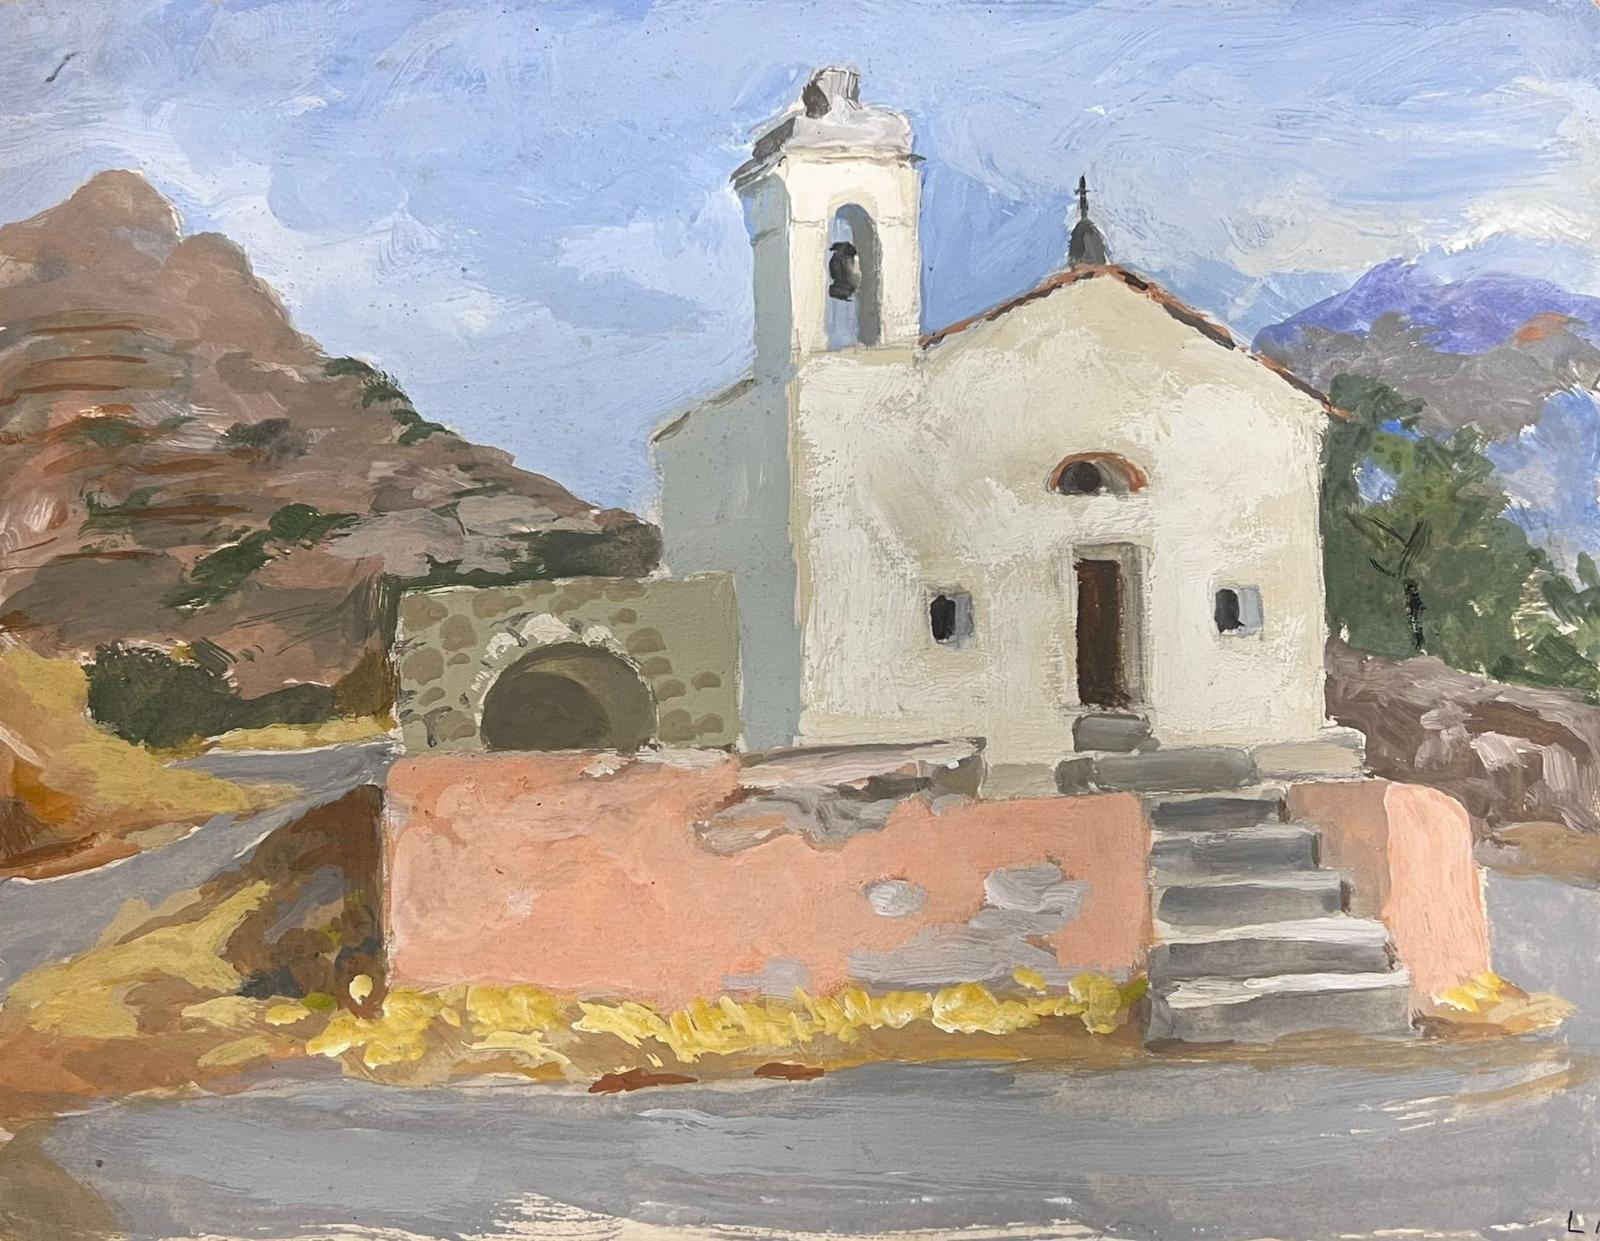 Louise Alix Landscape Painting - 1930's Italian Southern Old Church Memorial in Landscape by Female French artist